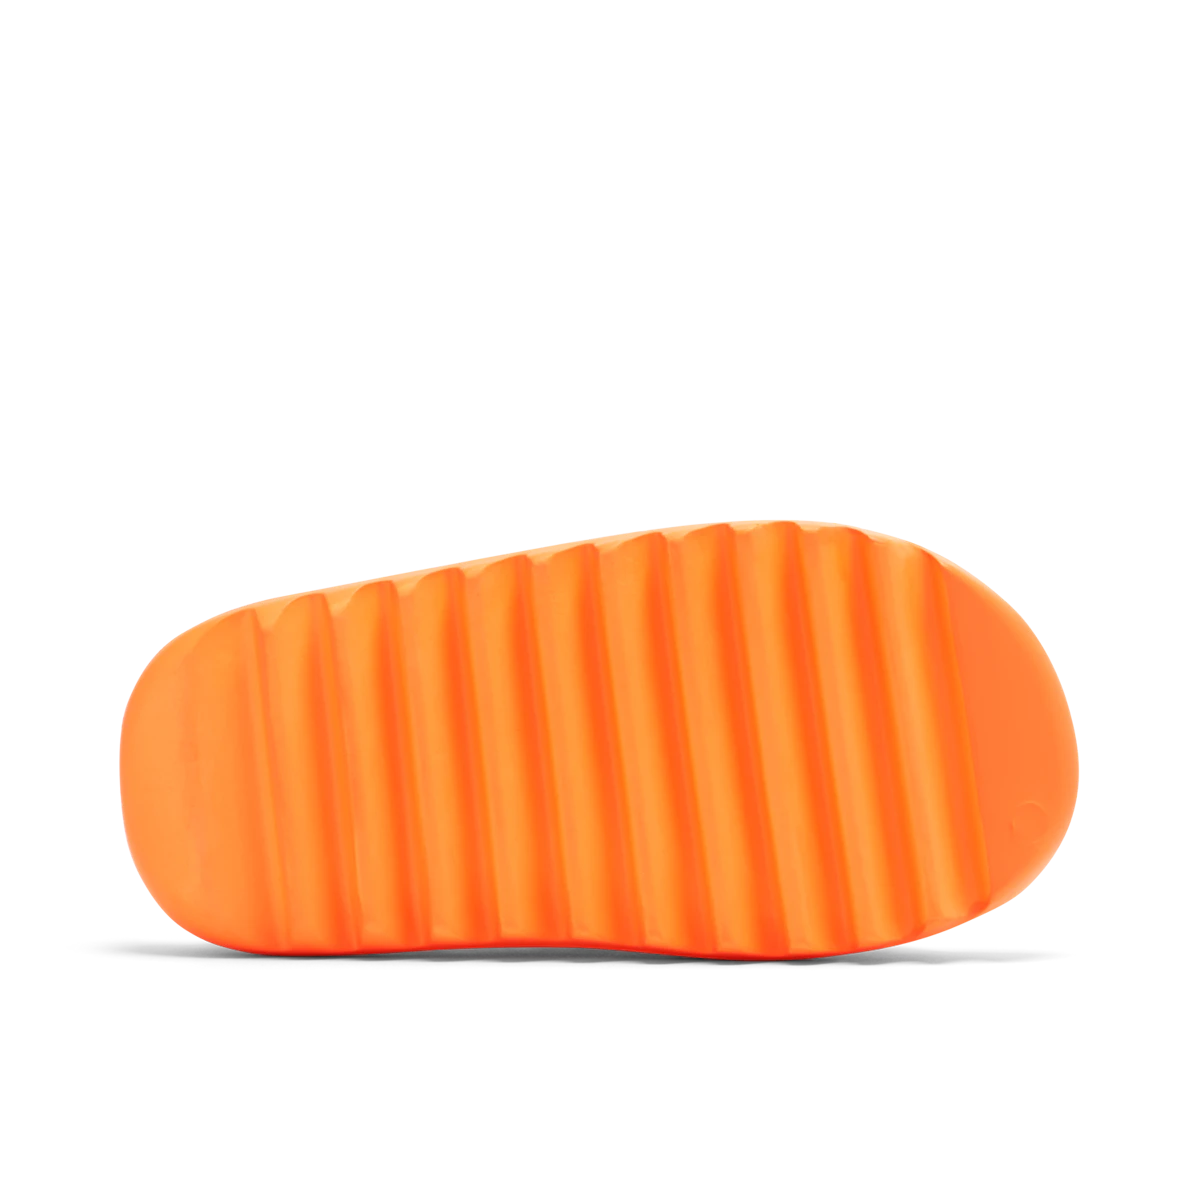 adidas Yeezy Slide Enflame Orange by Yeezy from £150.00